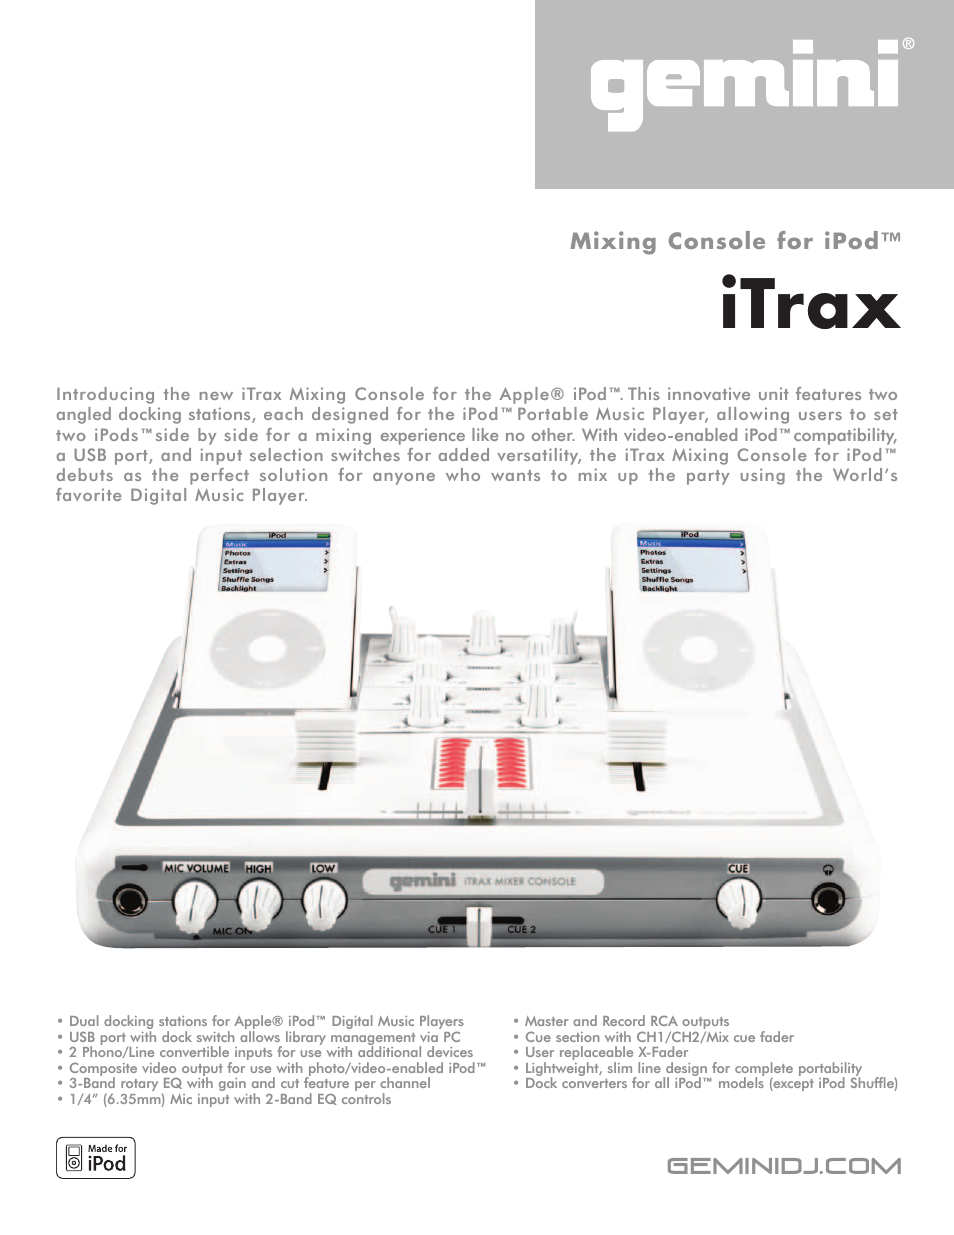 Mixing Console for iPod iTrax